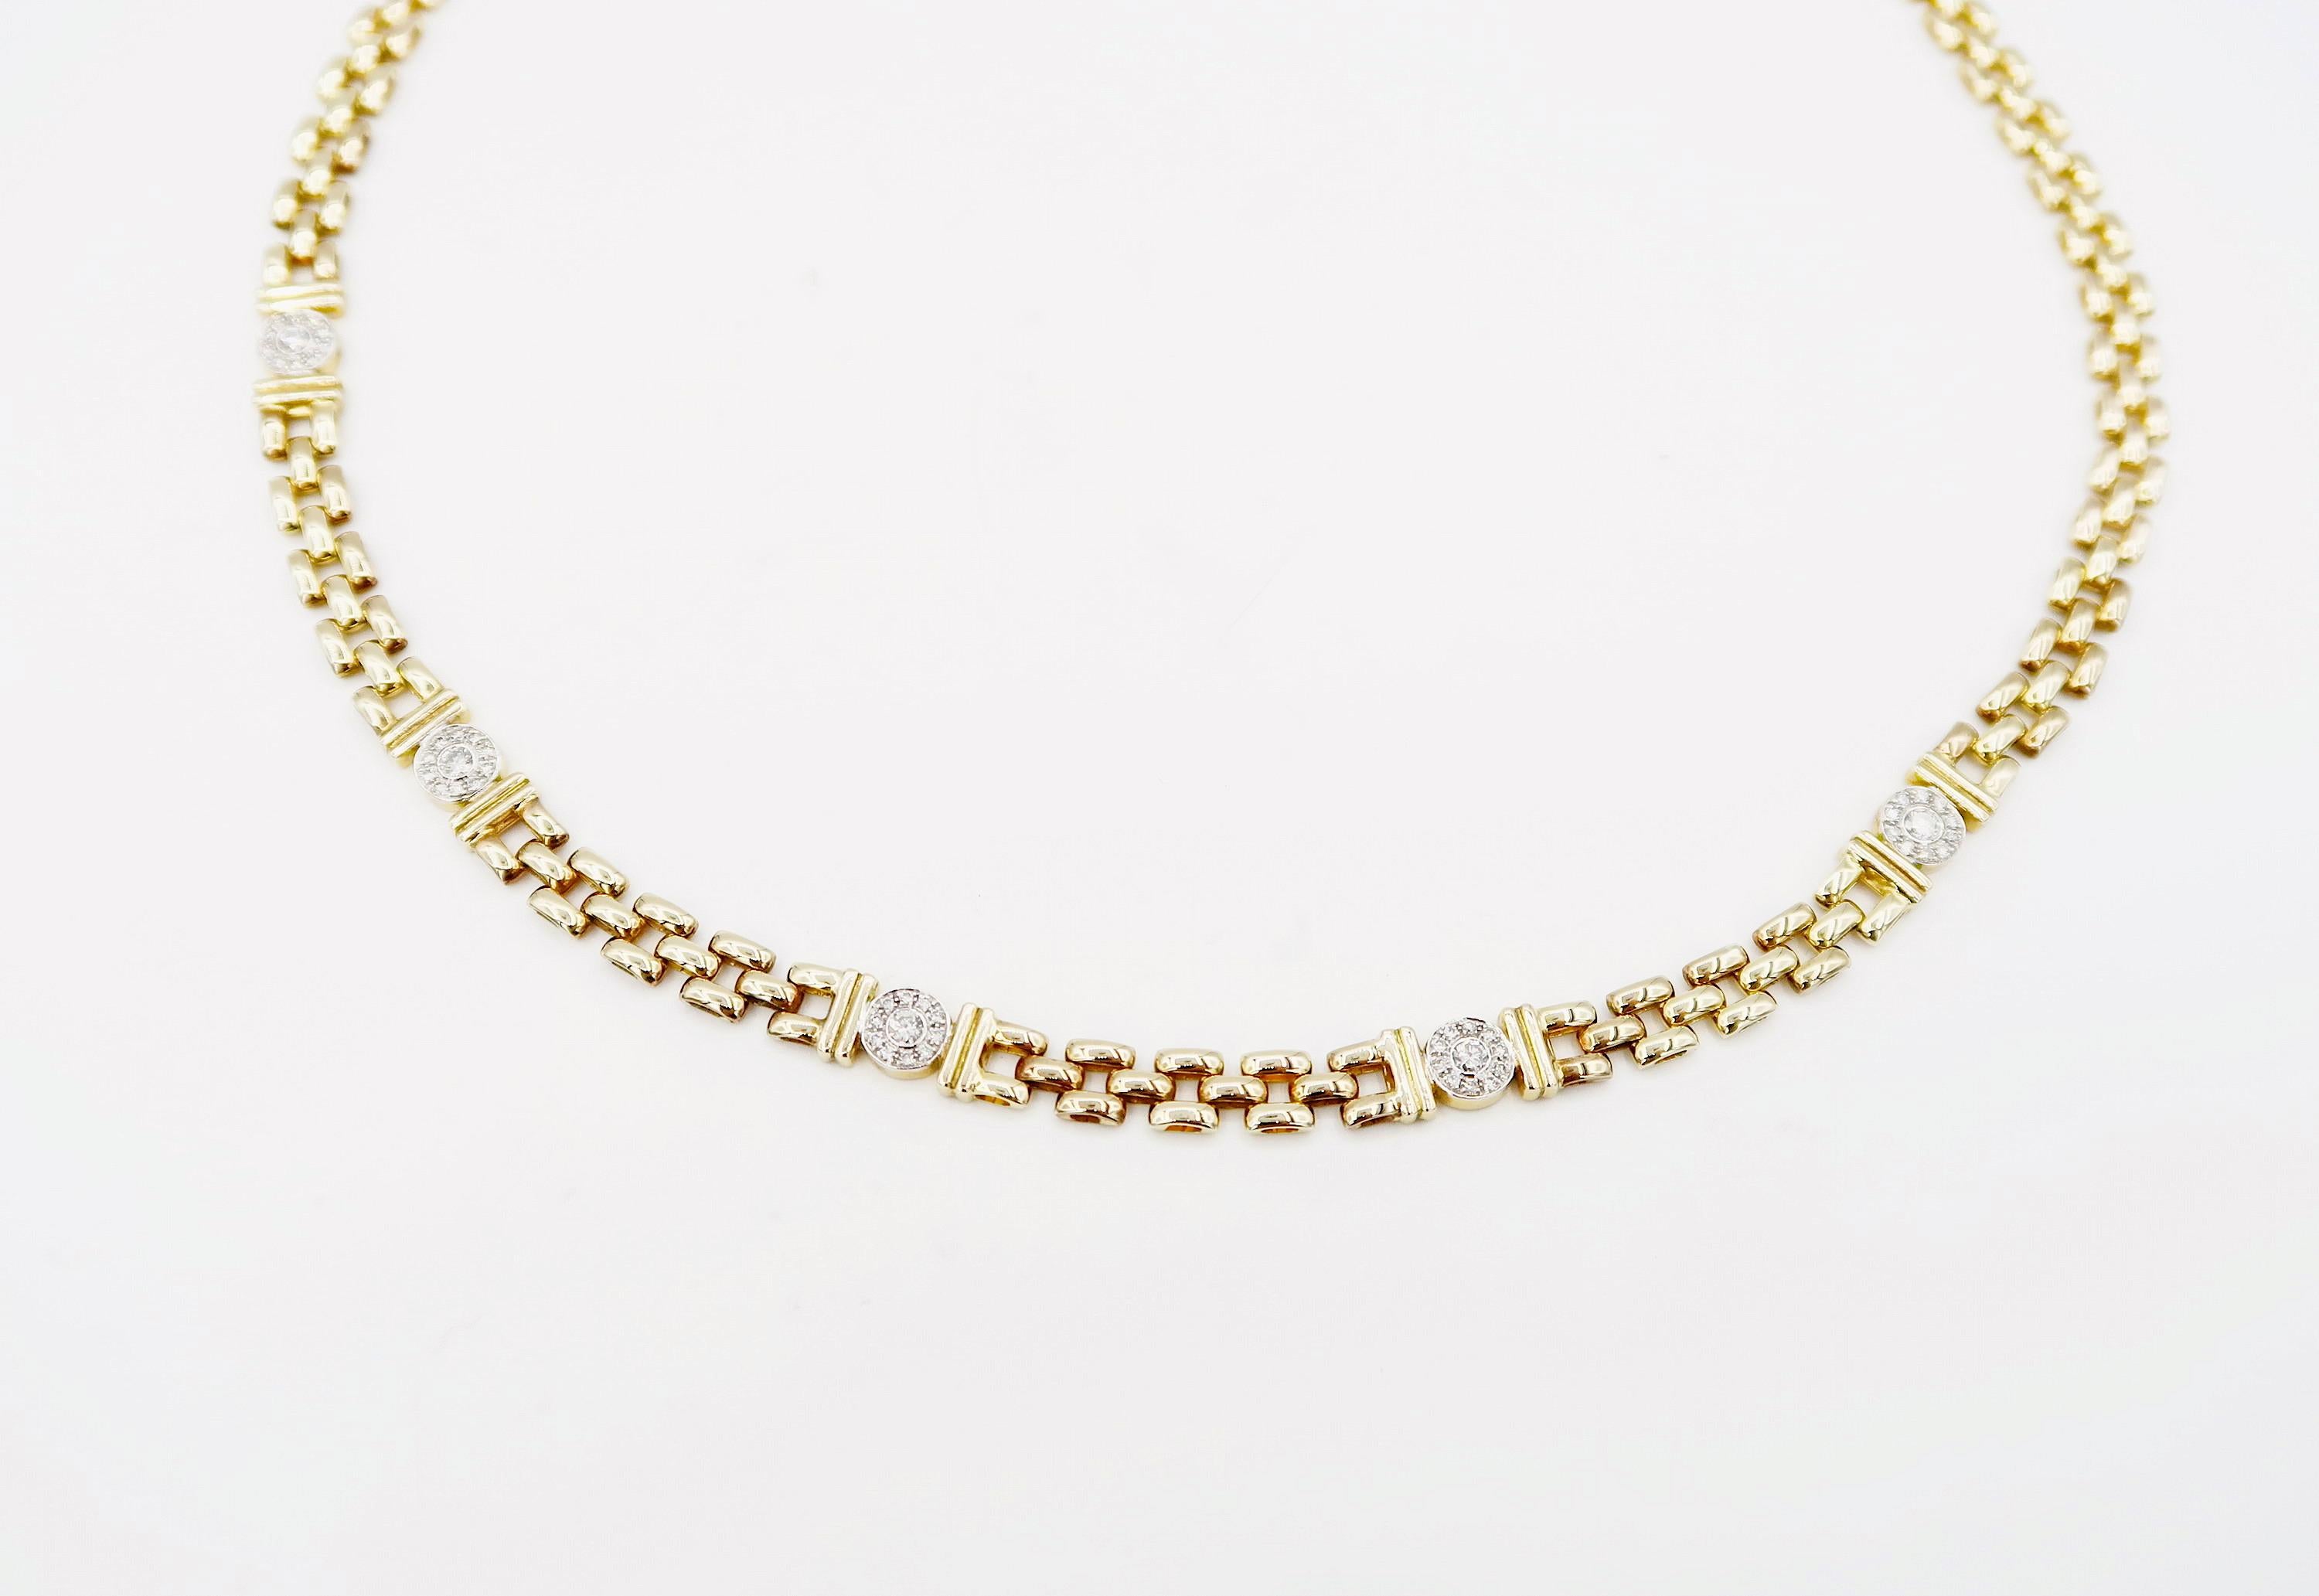 Brilliant Cut 14K Gold Panther Link Necklace with Bezel Halo Diamond Motifs For Sale